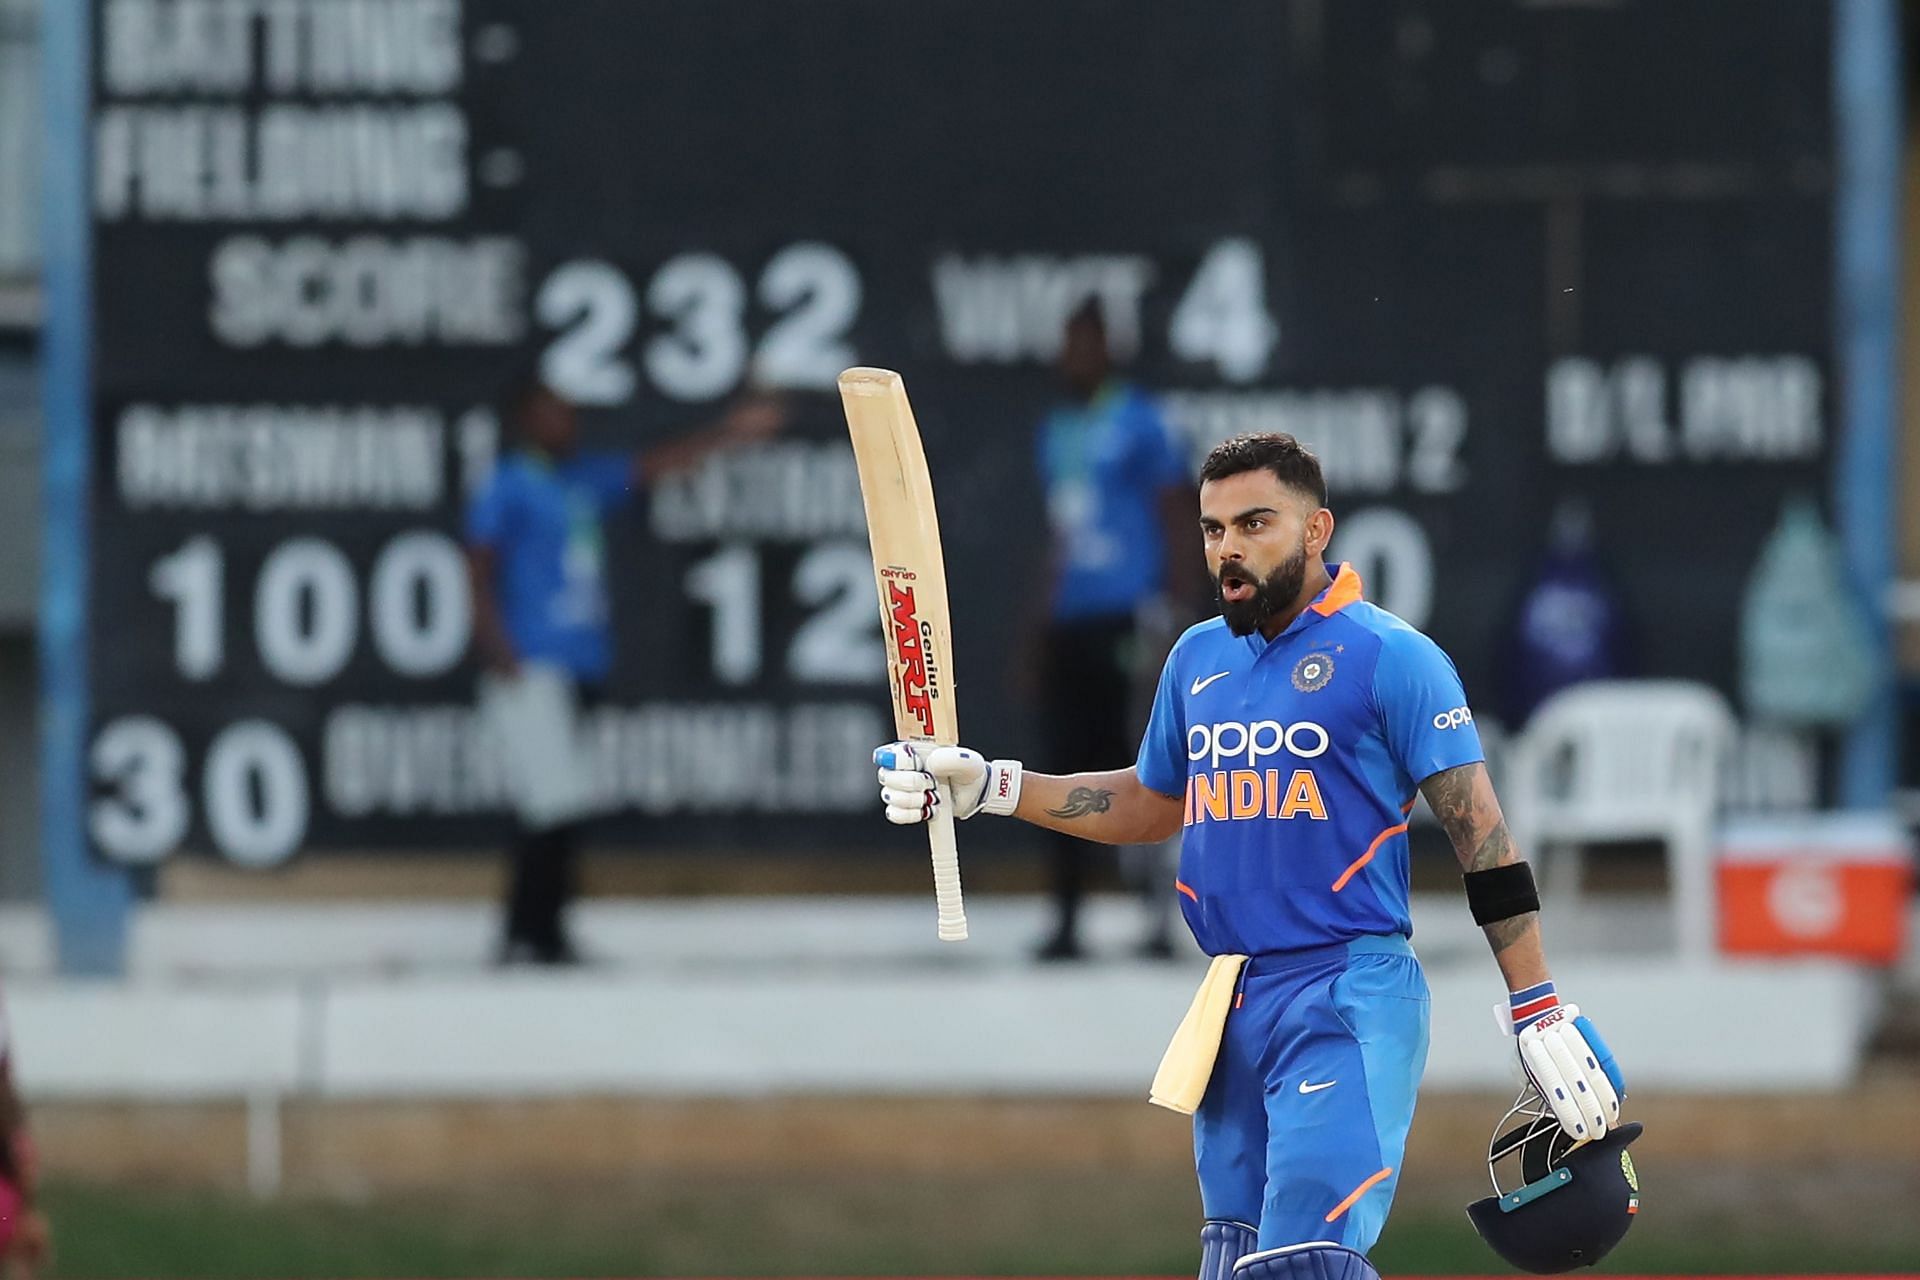 Virat Kohli has gotten out to spin quite often in recent times and will look to avoid that against West Indies.